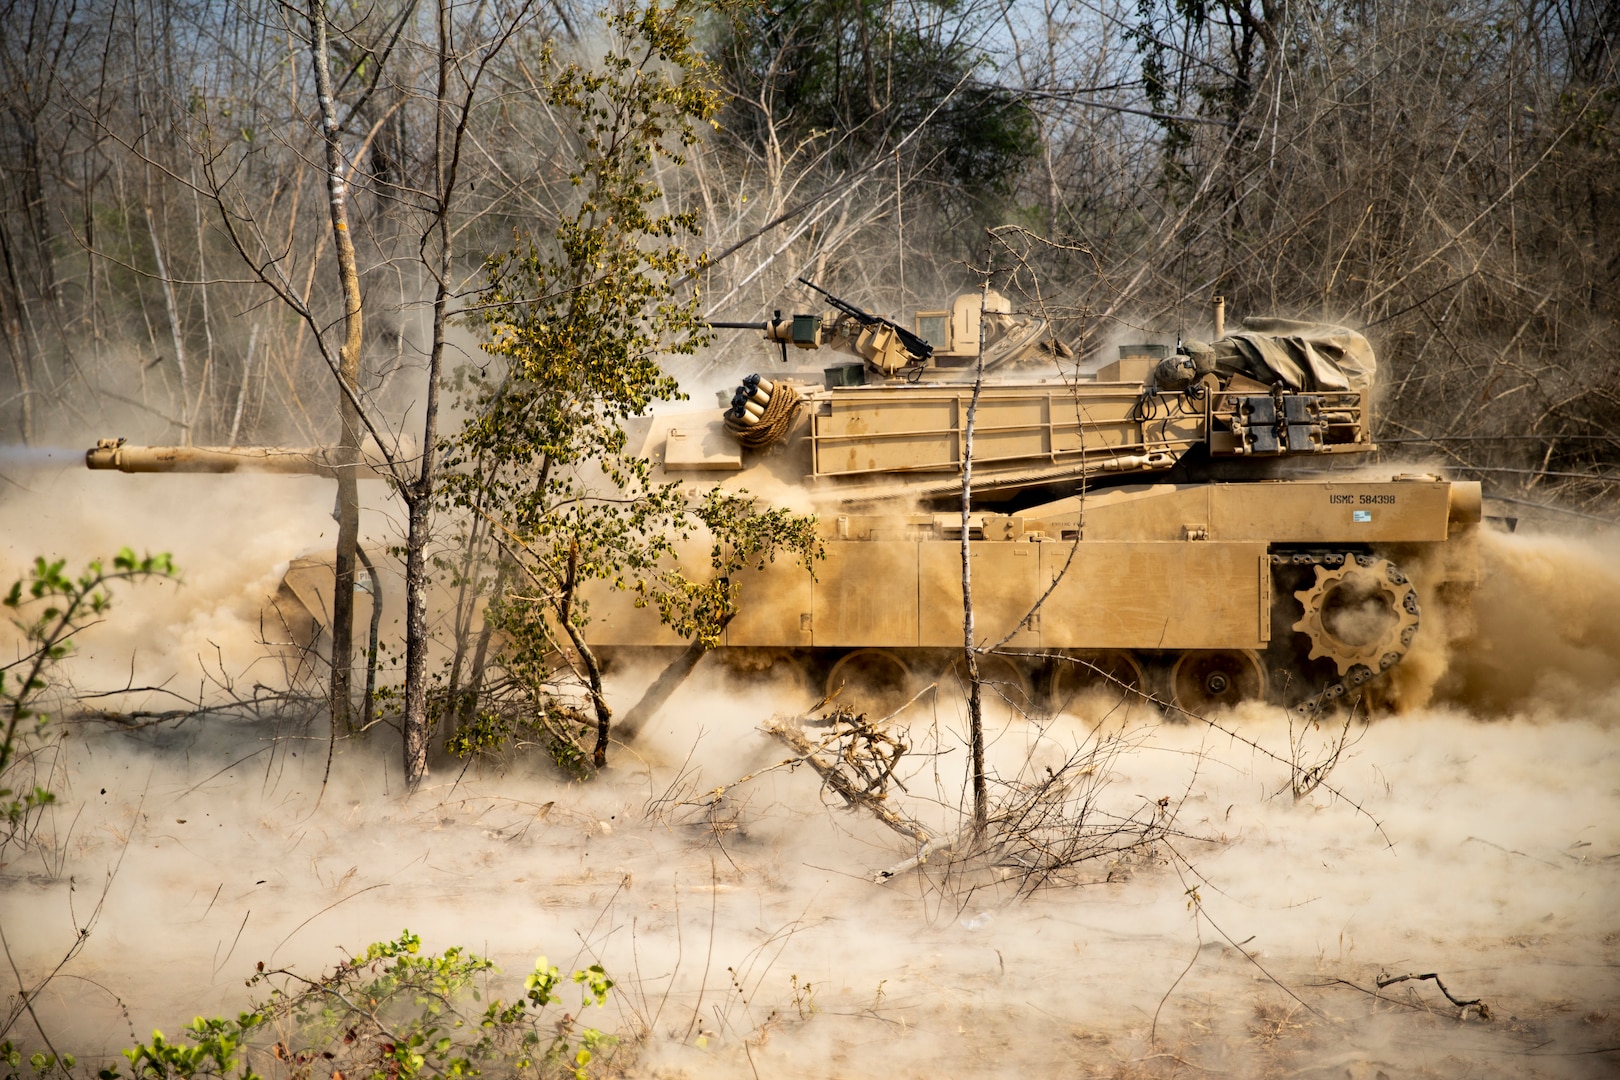 Marines with Charlie Company, 4th Tank Battalion, fire M1A1 Abrams tank during theater security cooperation exercise Cobra Gold 19, at Sukhothai, Kingdom of Thailand, February 21, 2019 (U.S. Marine Corps/Kyle C. Talbot)